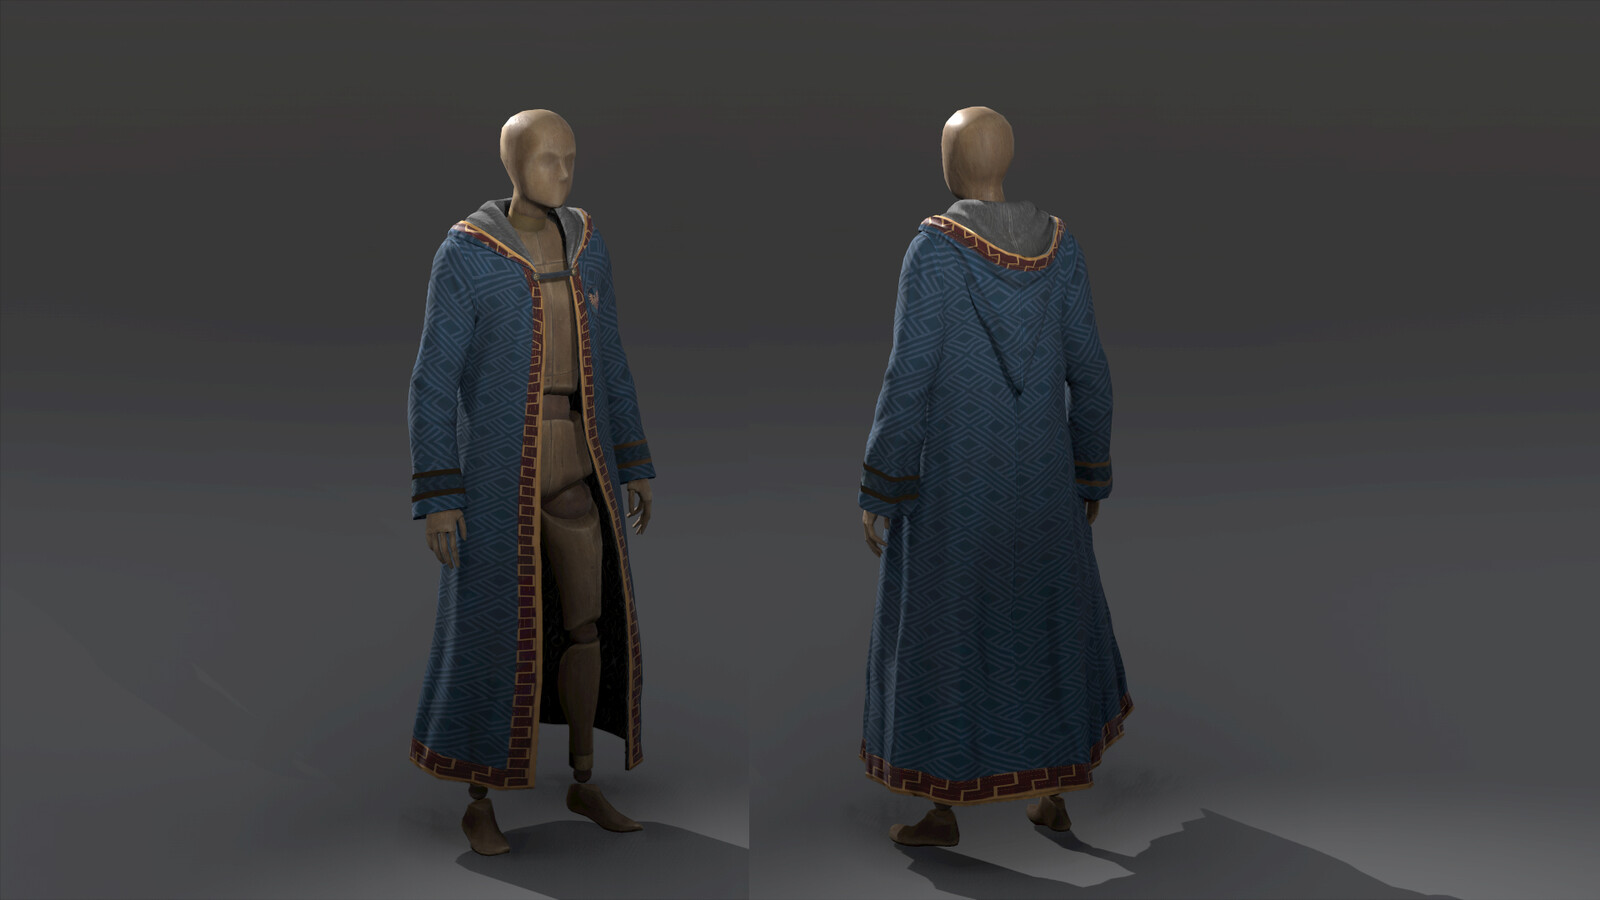 For these robes I used existing geometry and updated/ made textures for this robe set.